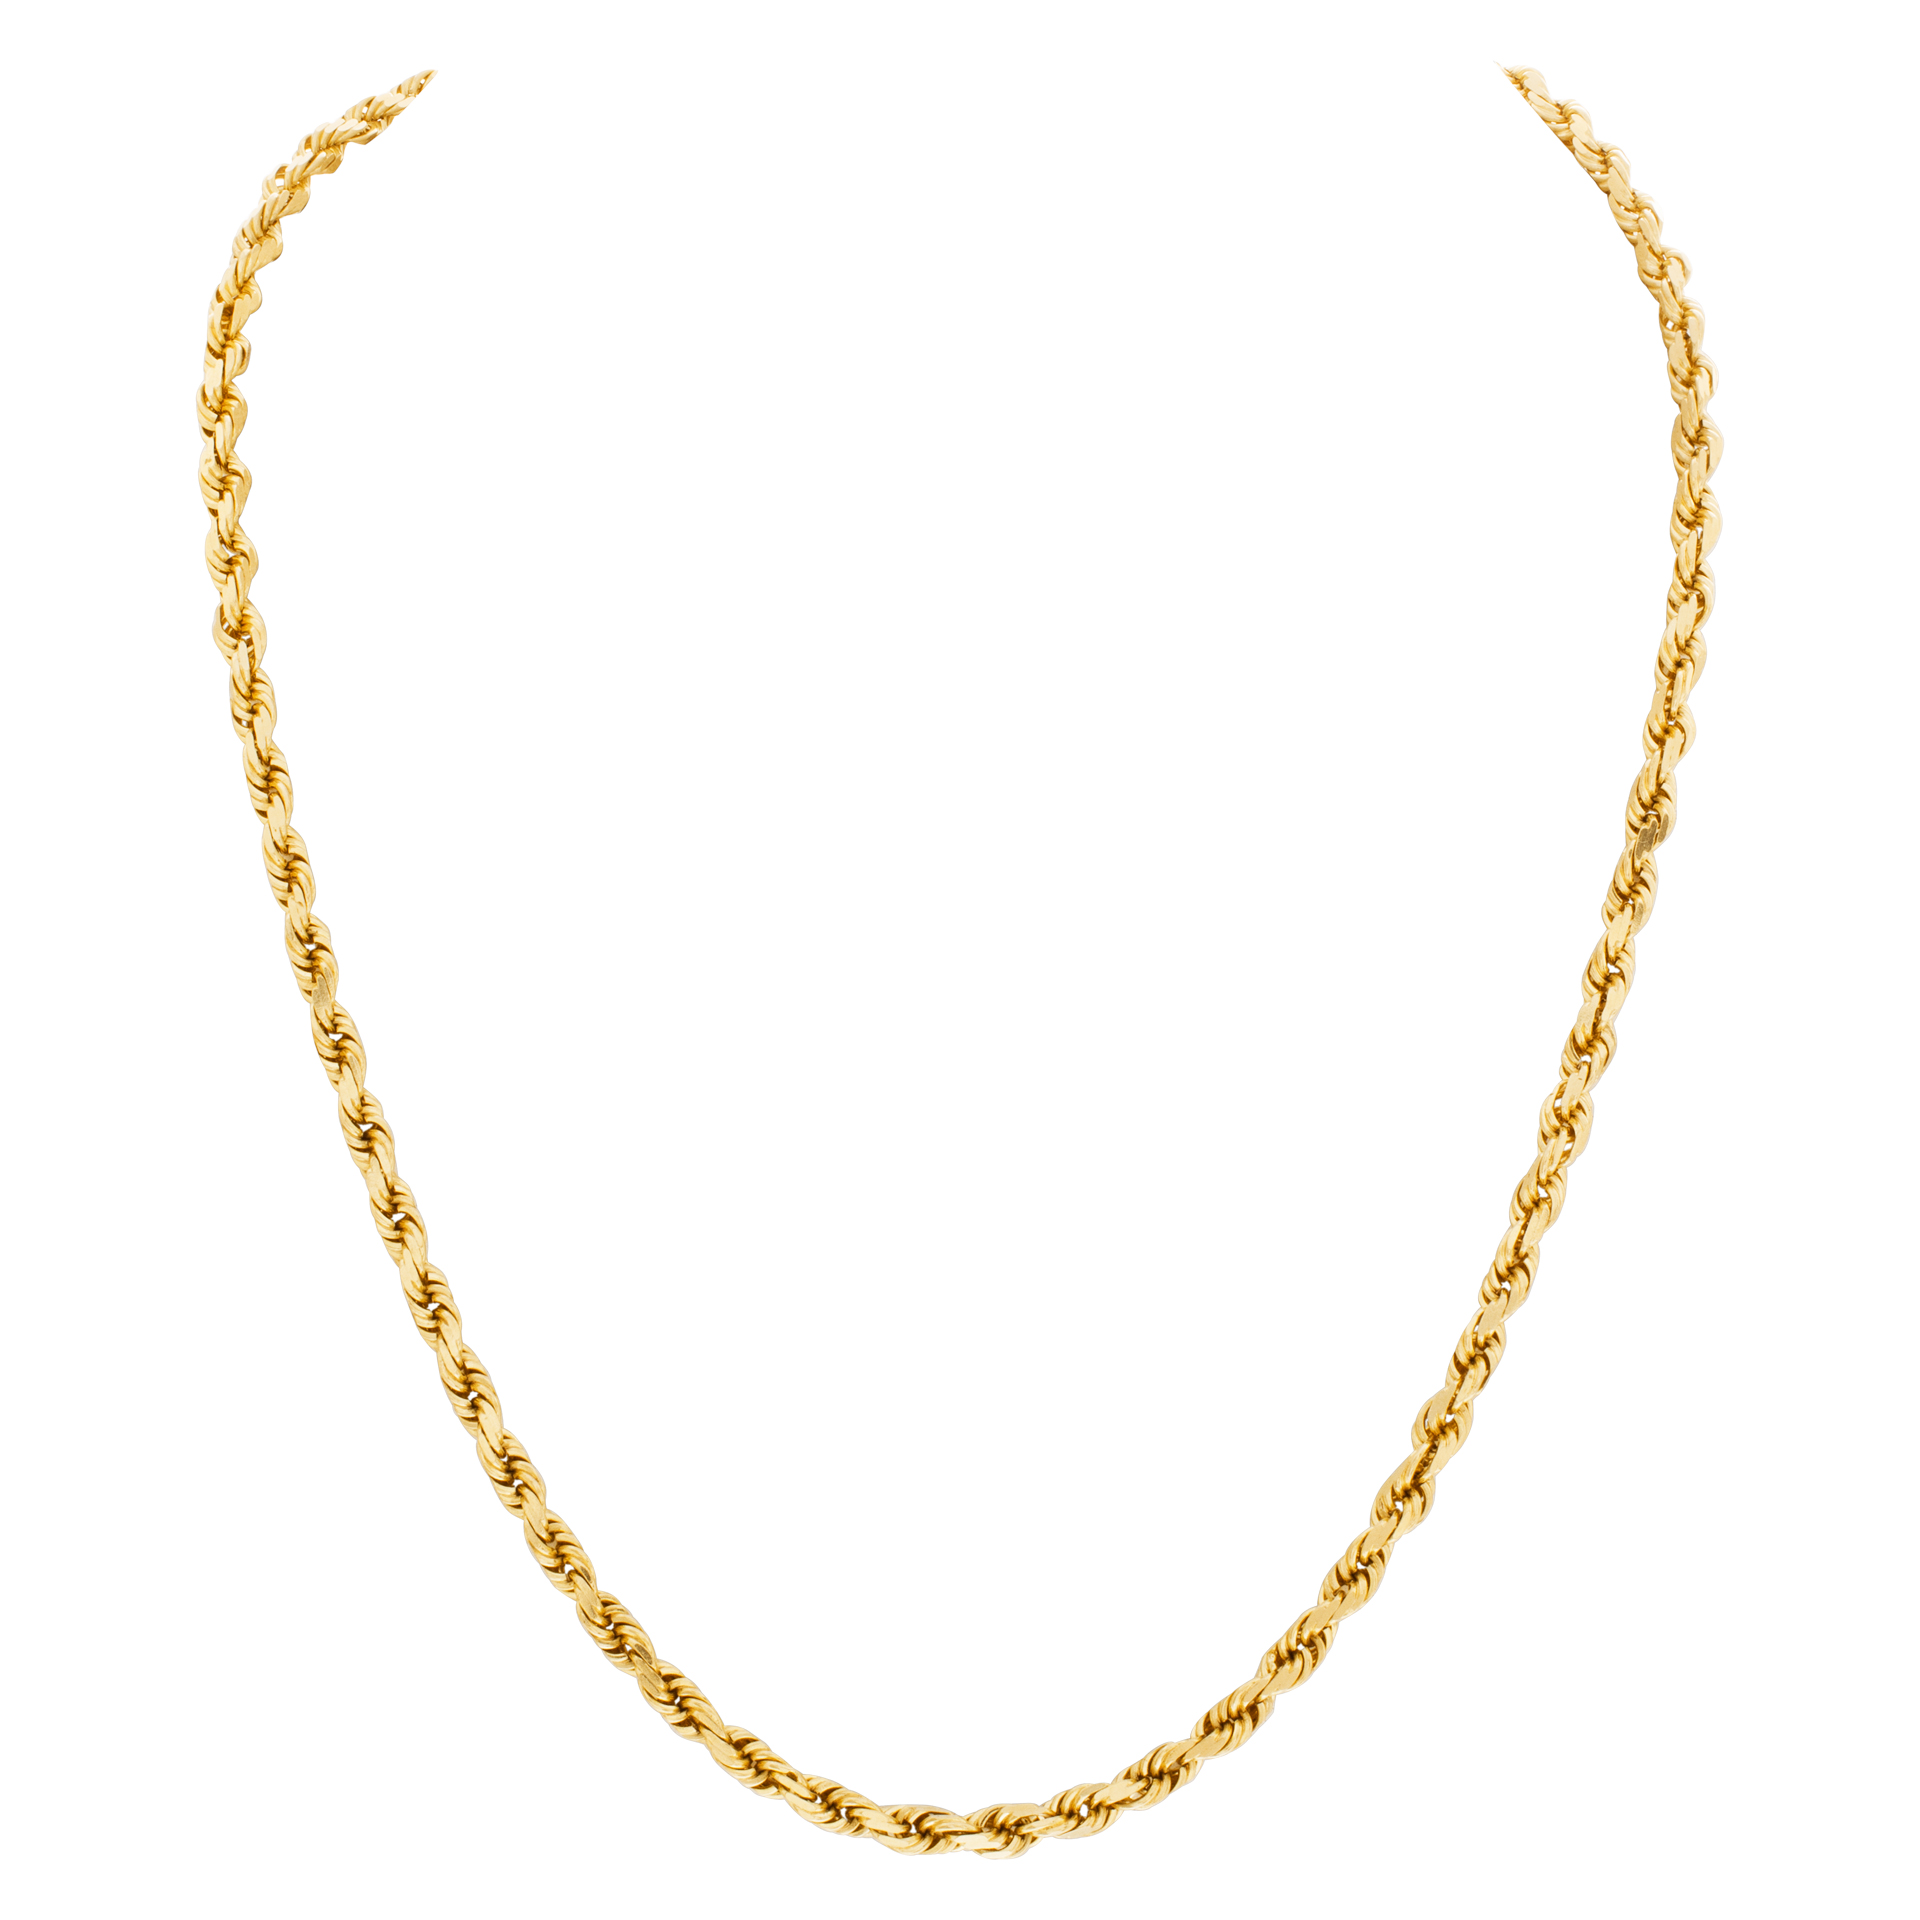 Rope style chain in 14k yellow gold